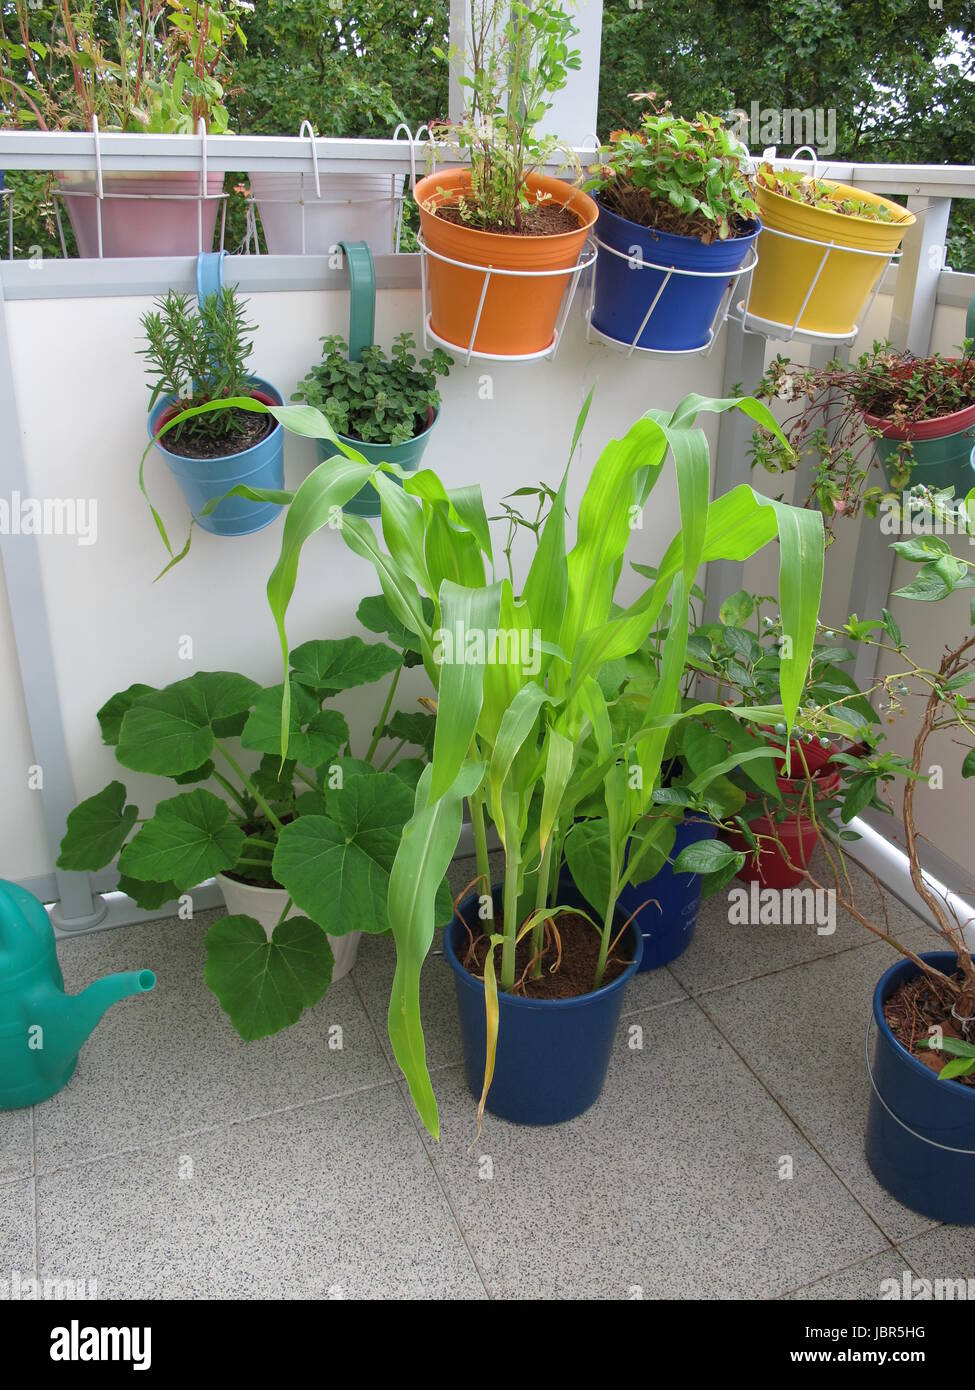 vegetable plants in pots on the balcony Stock Photo